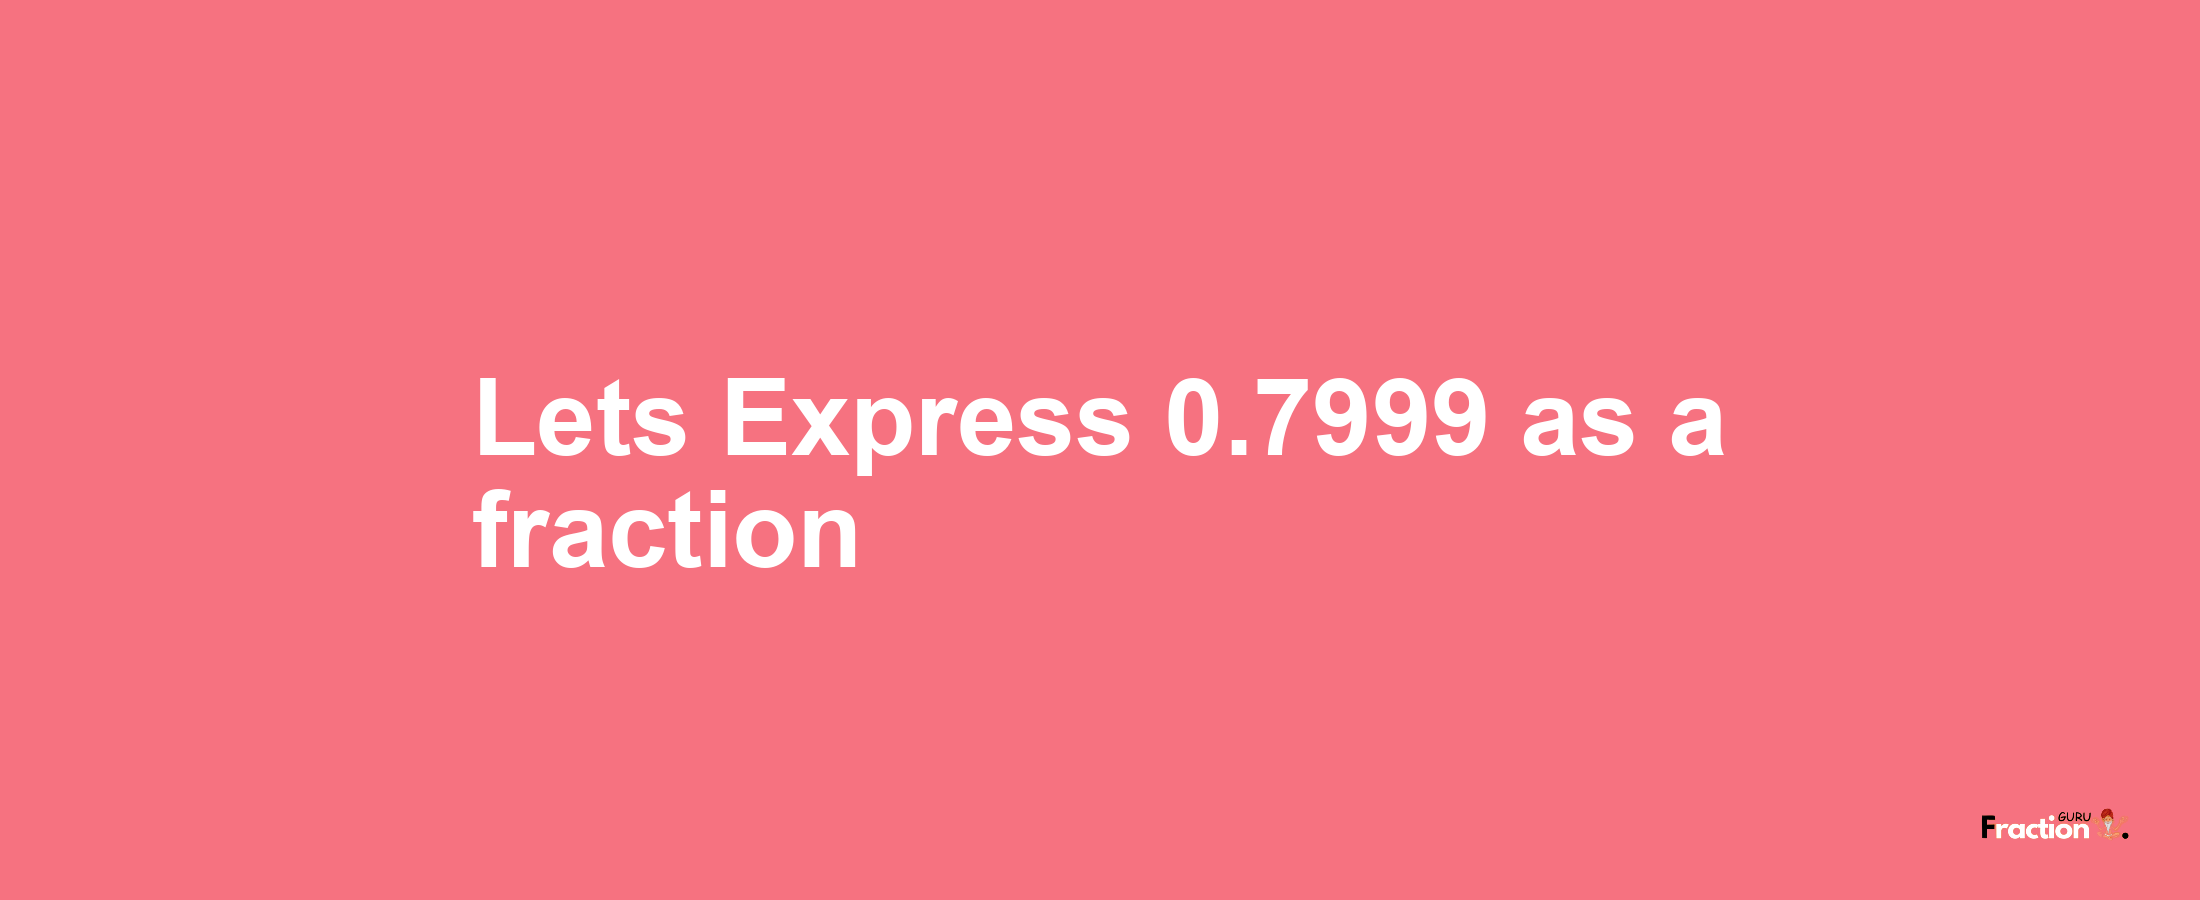 Lets Express 0.7999 as afraction